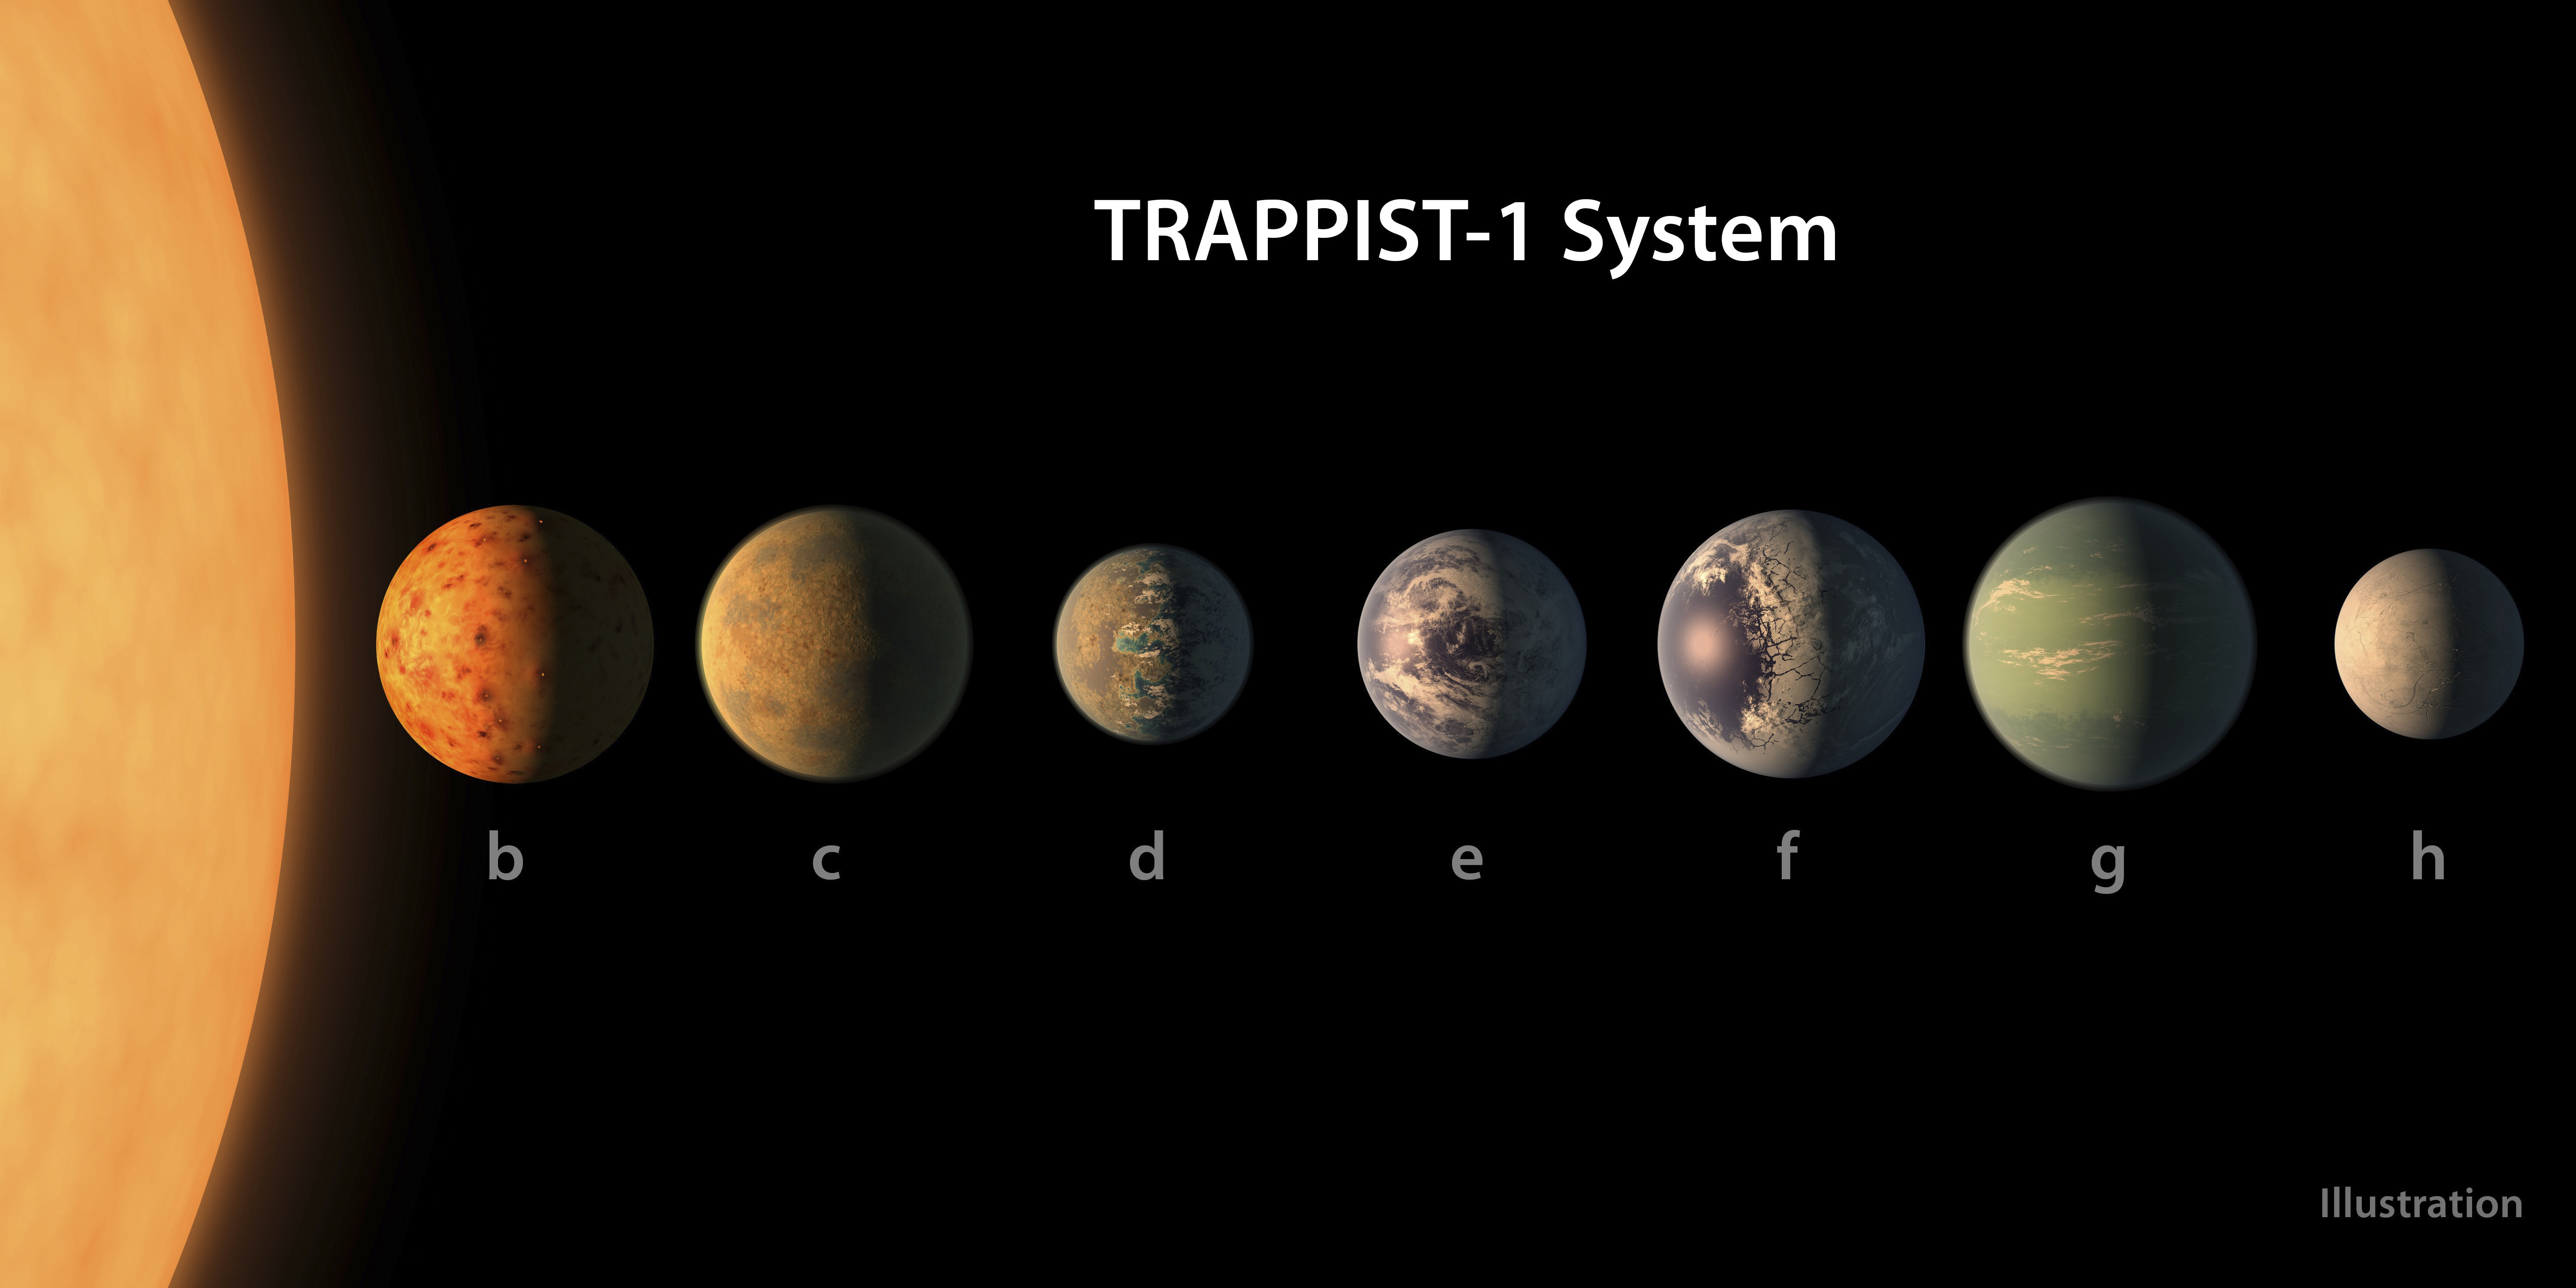 This illustration provided by NASA/JPL-Caltech shows an artist's conception of what the TRAPPIST-1 planetary system may look like, based on available data about their diameters, masses and distances from the host star. The planets circle tightly around a dim dwarf star called Trappist-1, barely the size of Jupiter. Three are in the so-called habitable zone, where liquid water and, possibly life, might exist. The others are right on the doorstep.